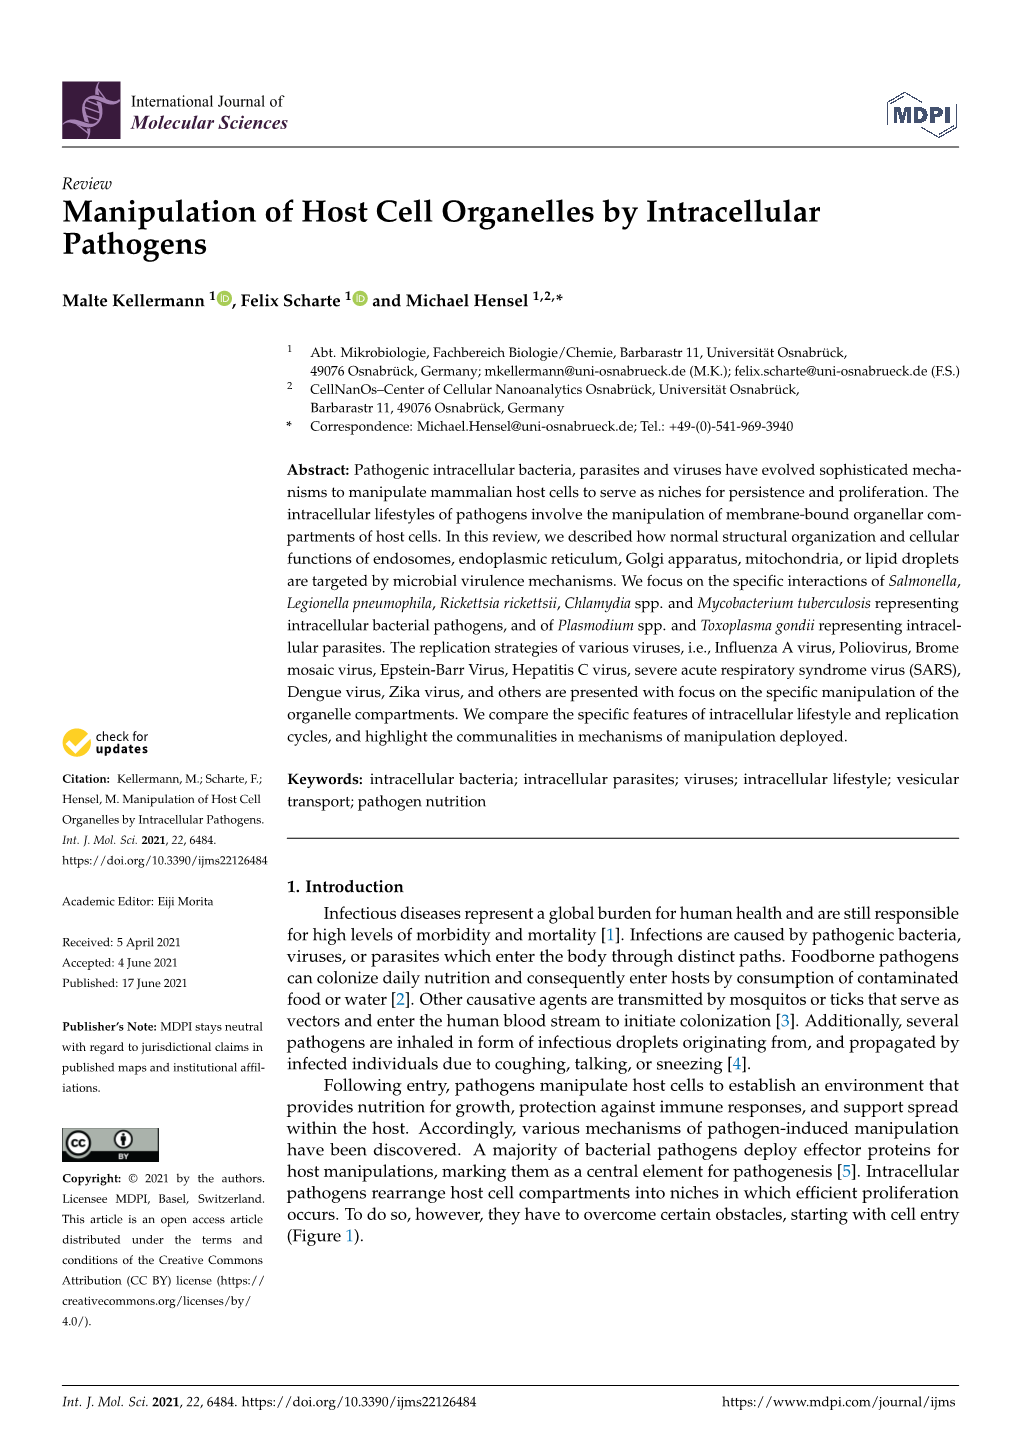 Manipulation of Host Cell Organelles by Intracellular Pathogens